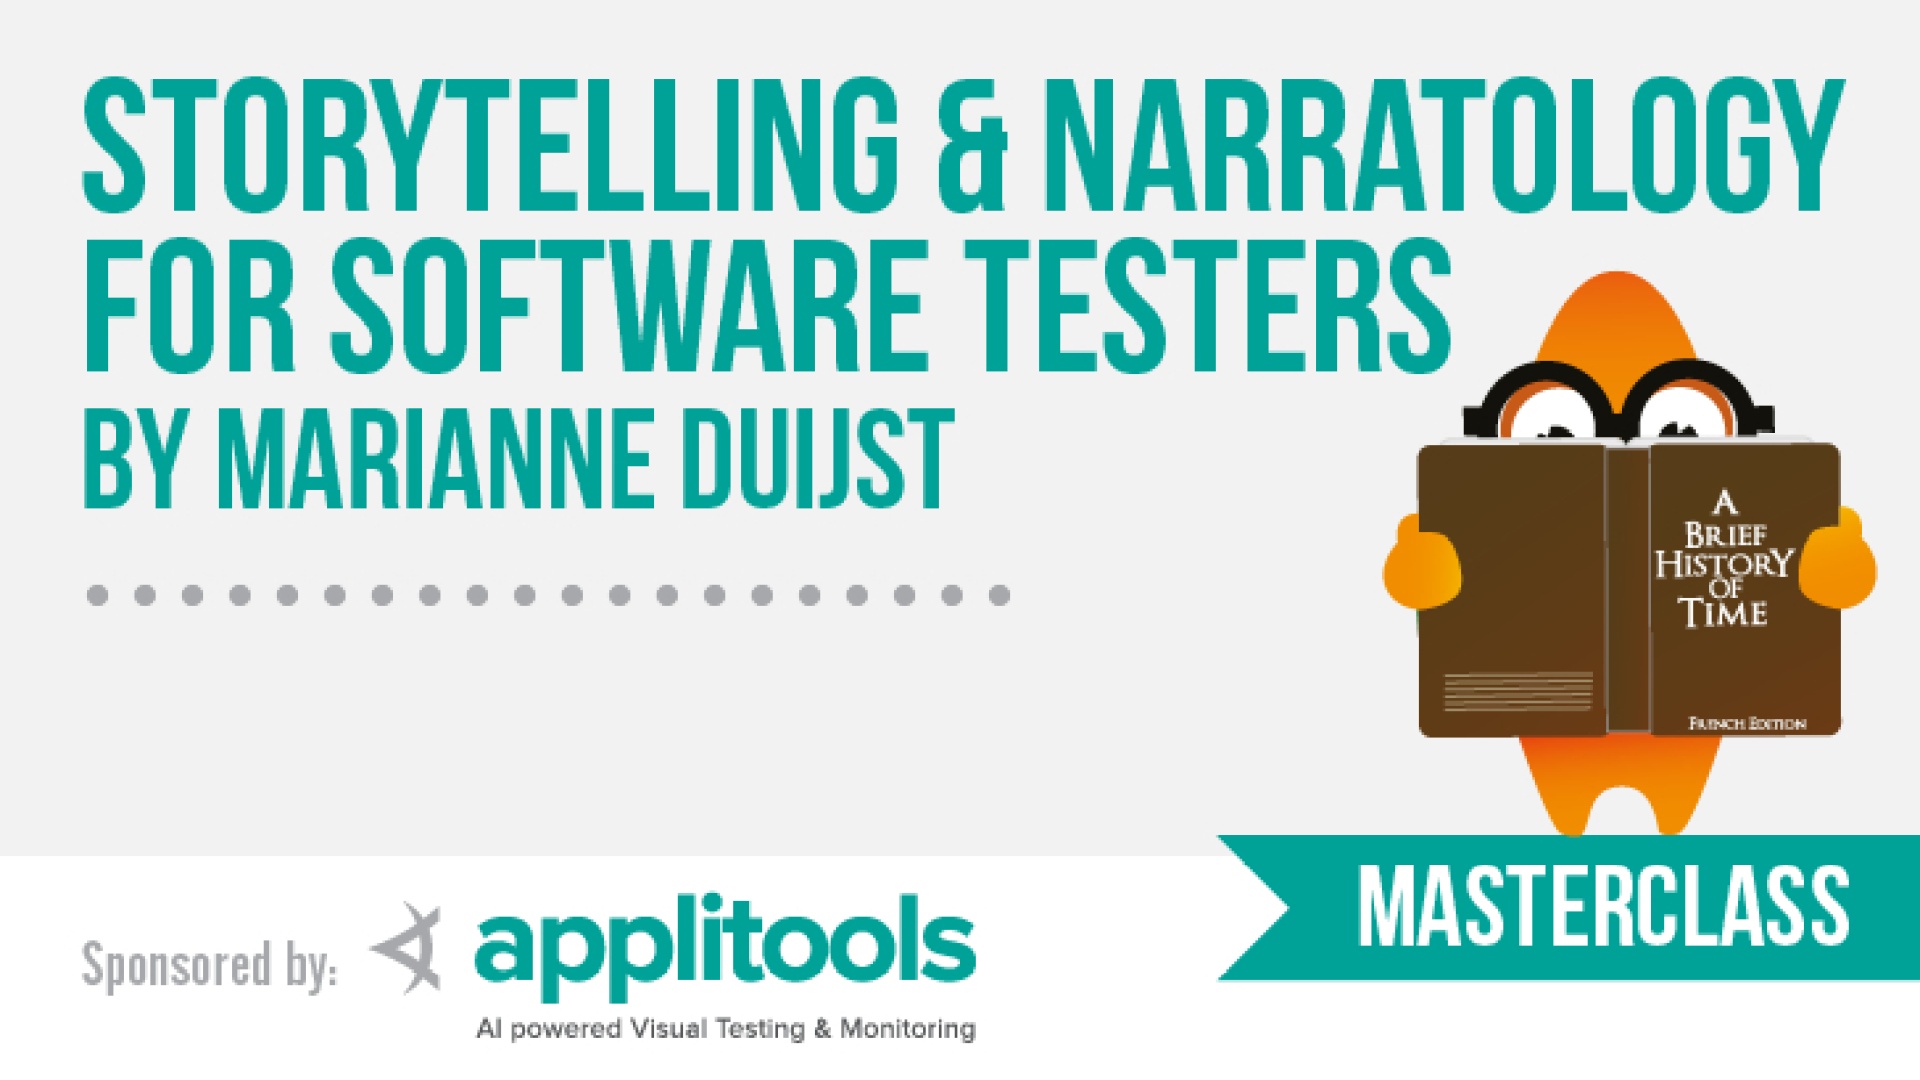 Storytelling & Narratology for Software Testers  image